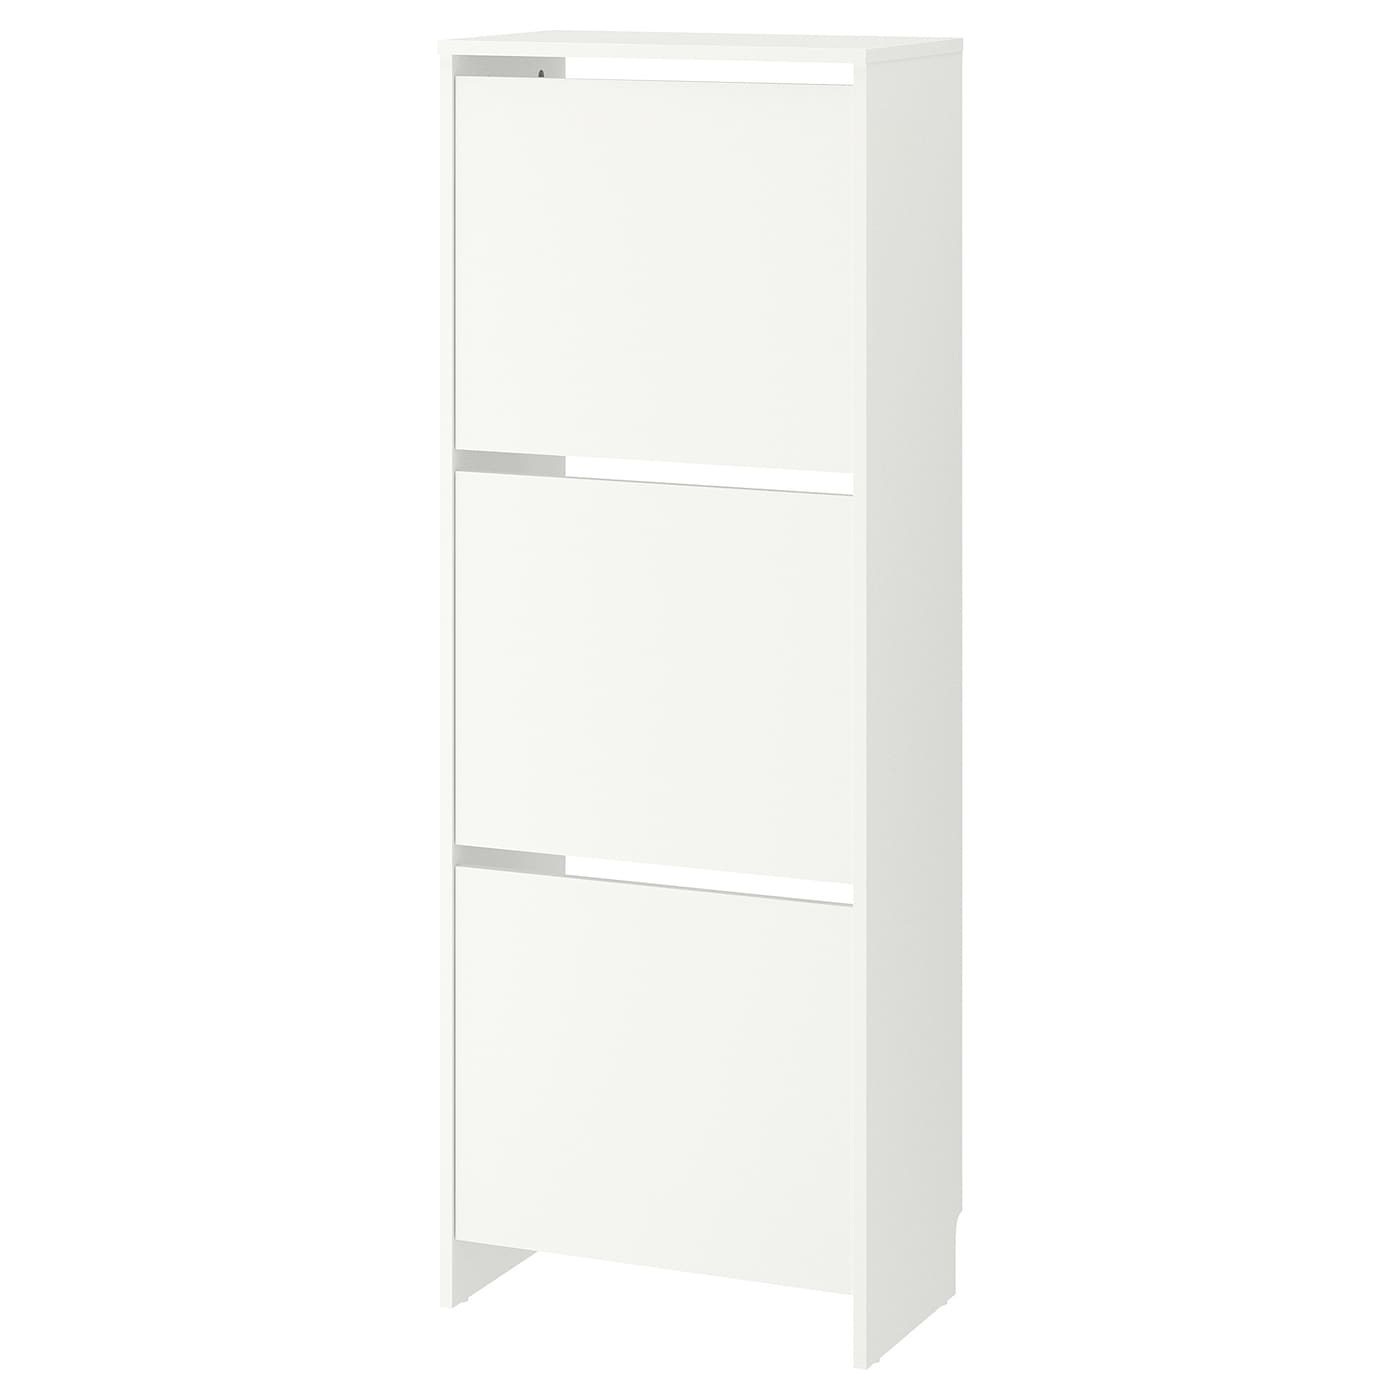 IKEA-BISSA-Shoe cabinet with 3 compartments dimensions color 135 x 49 cm white 